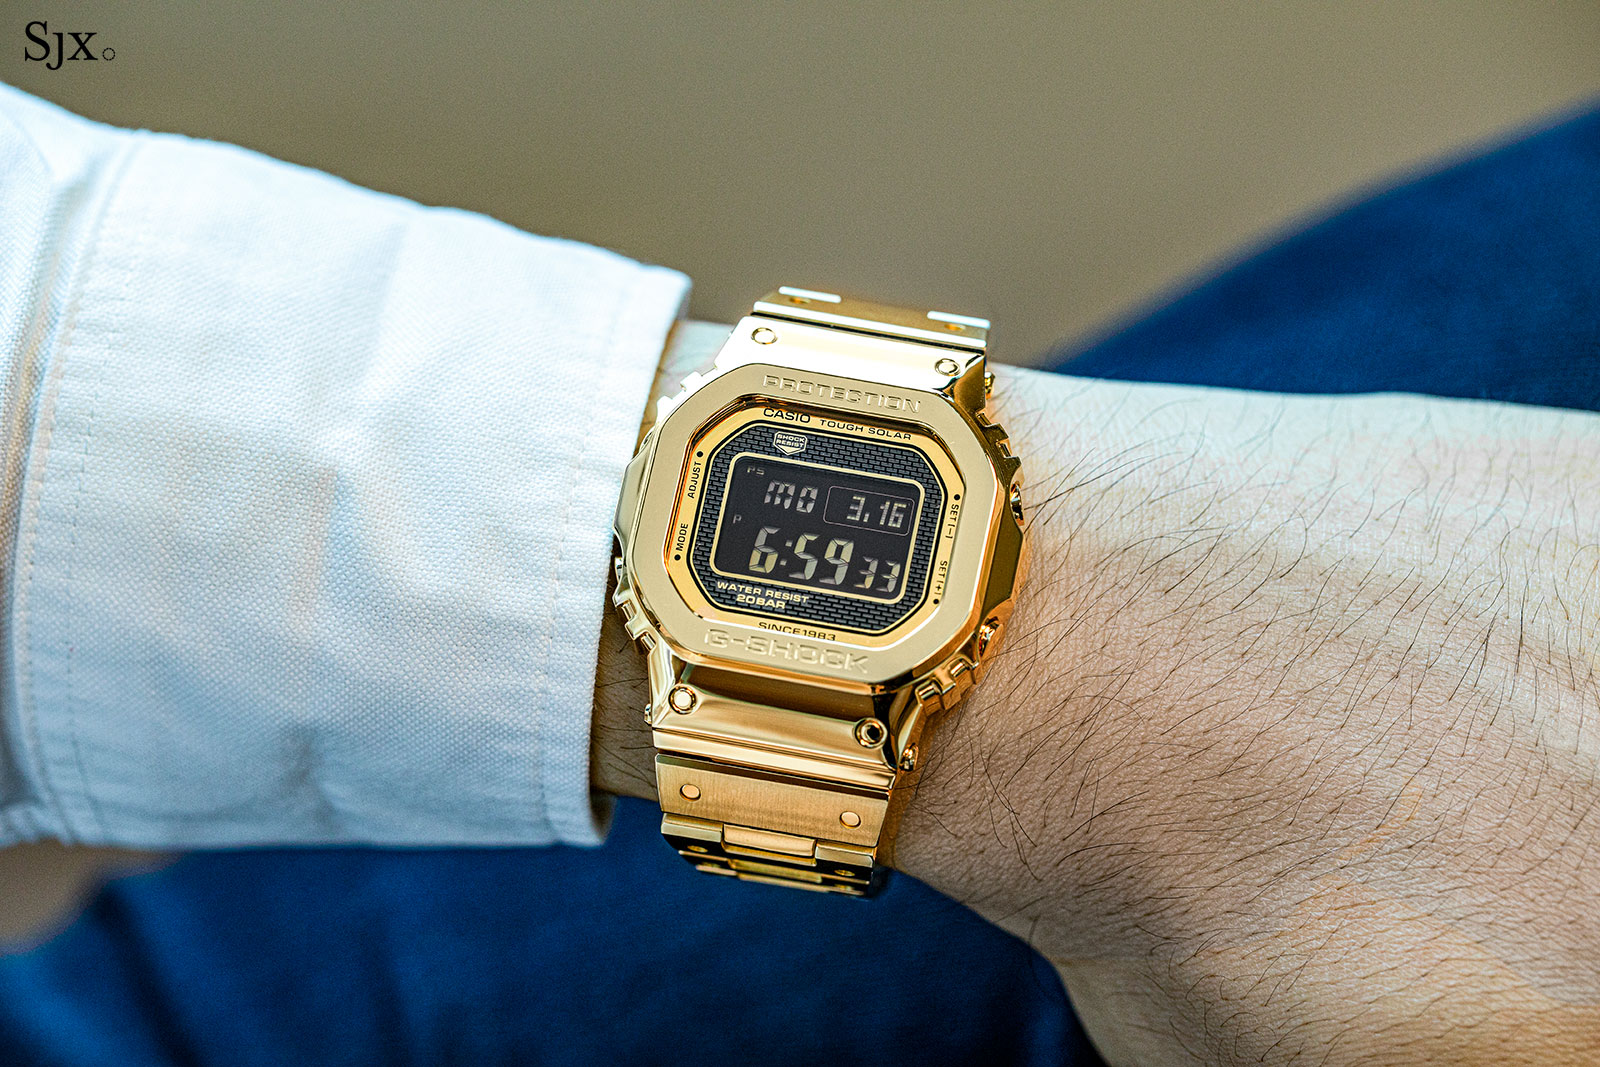 Introducing the $70,000 G-Shock “Dream Project” in Solid, 18k